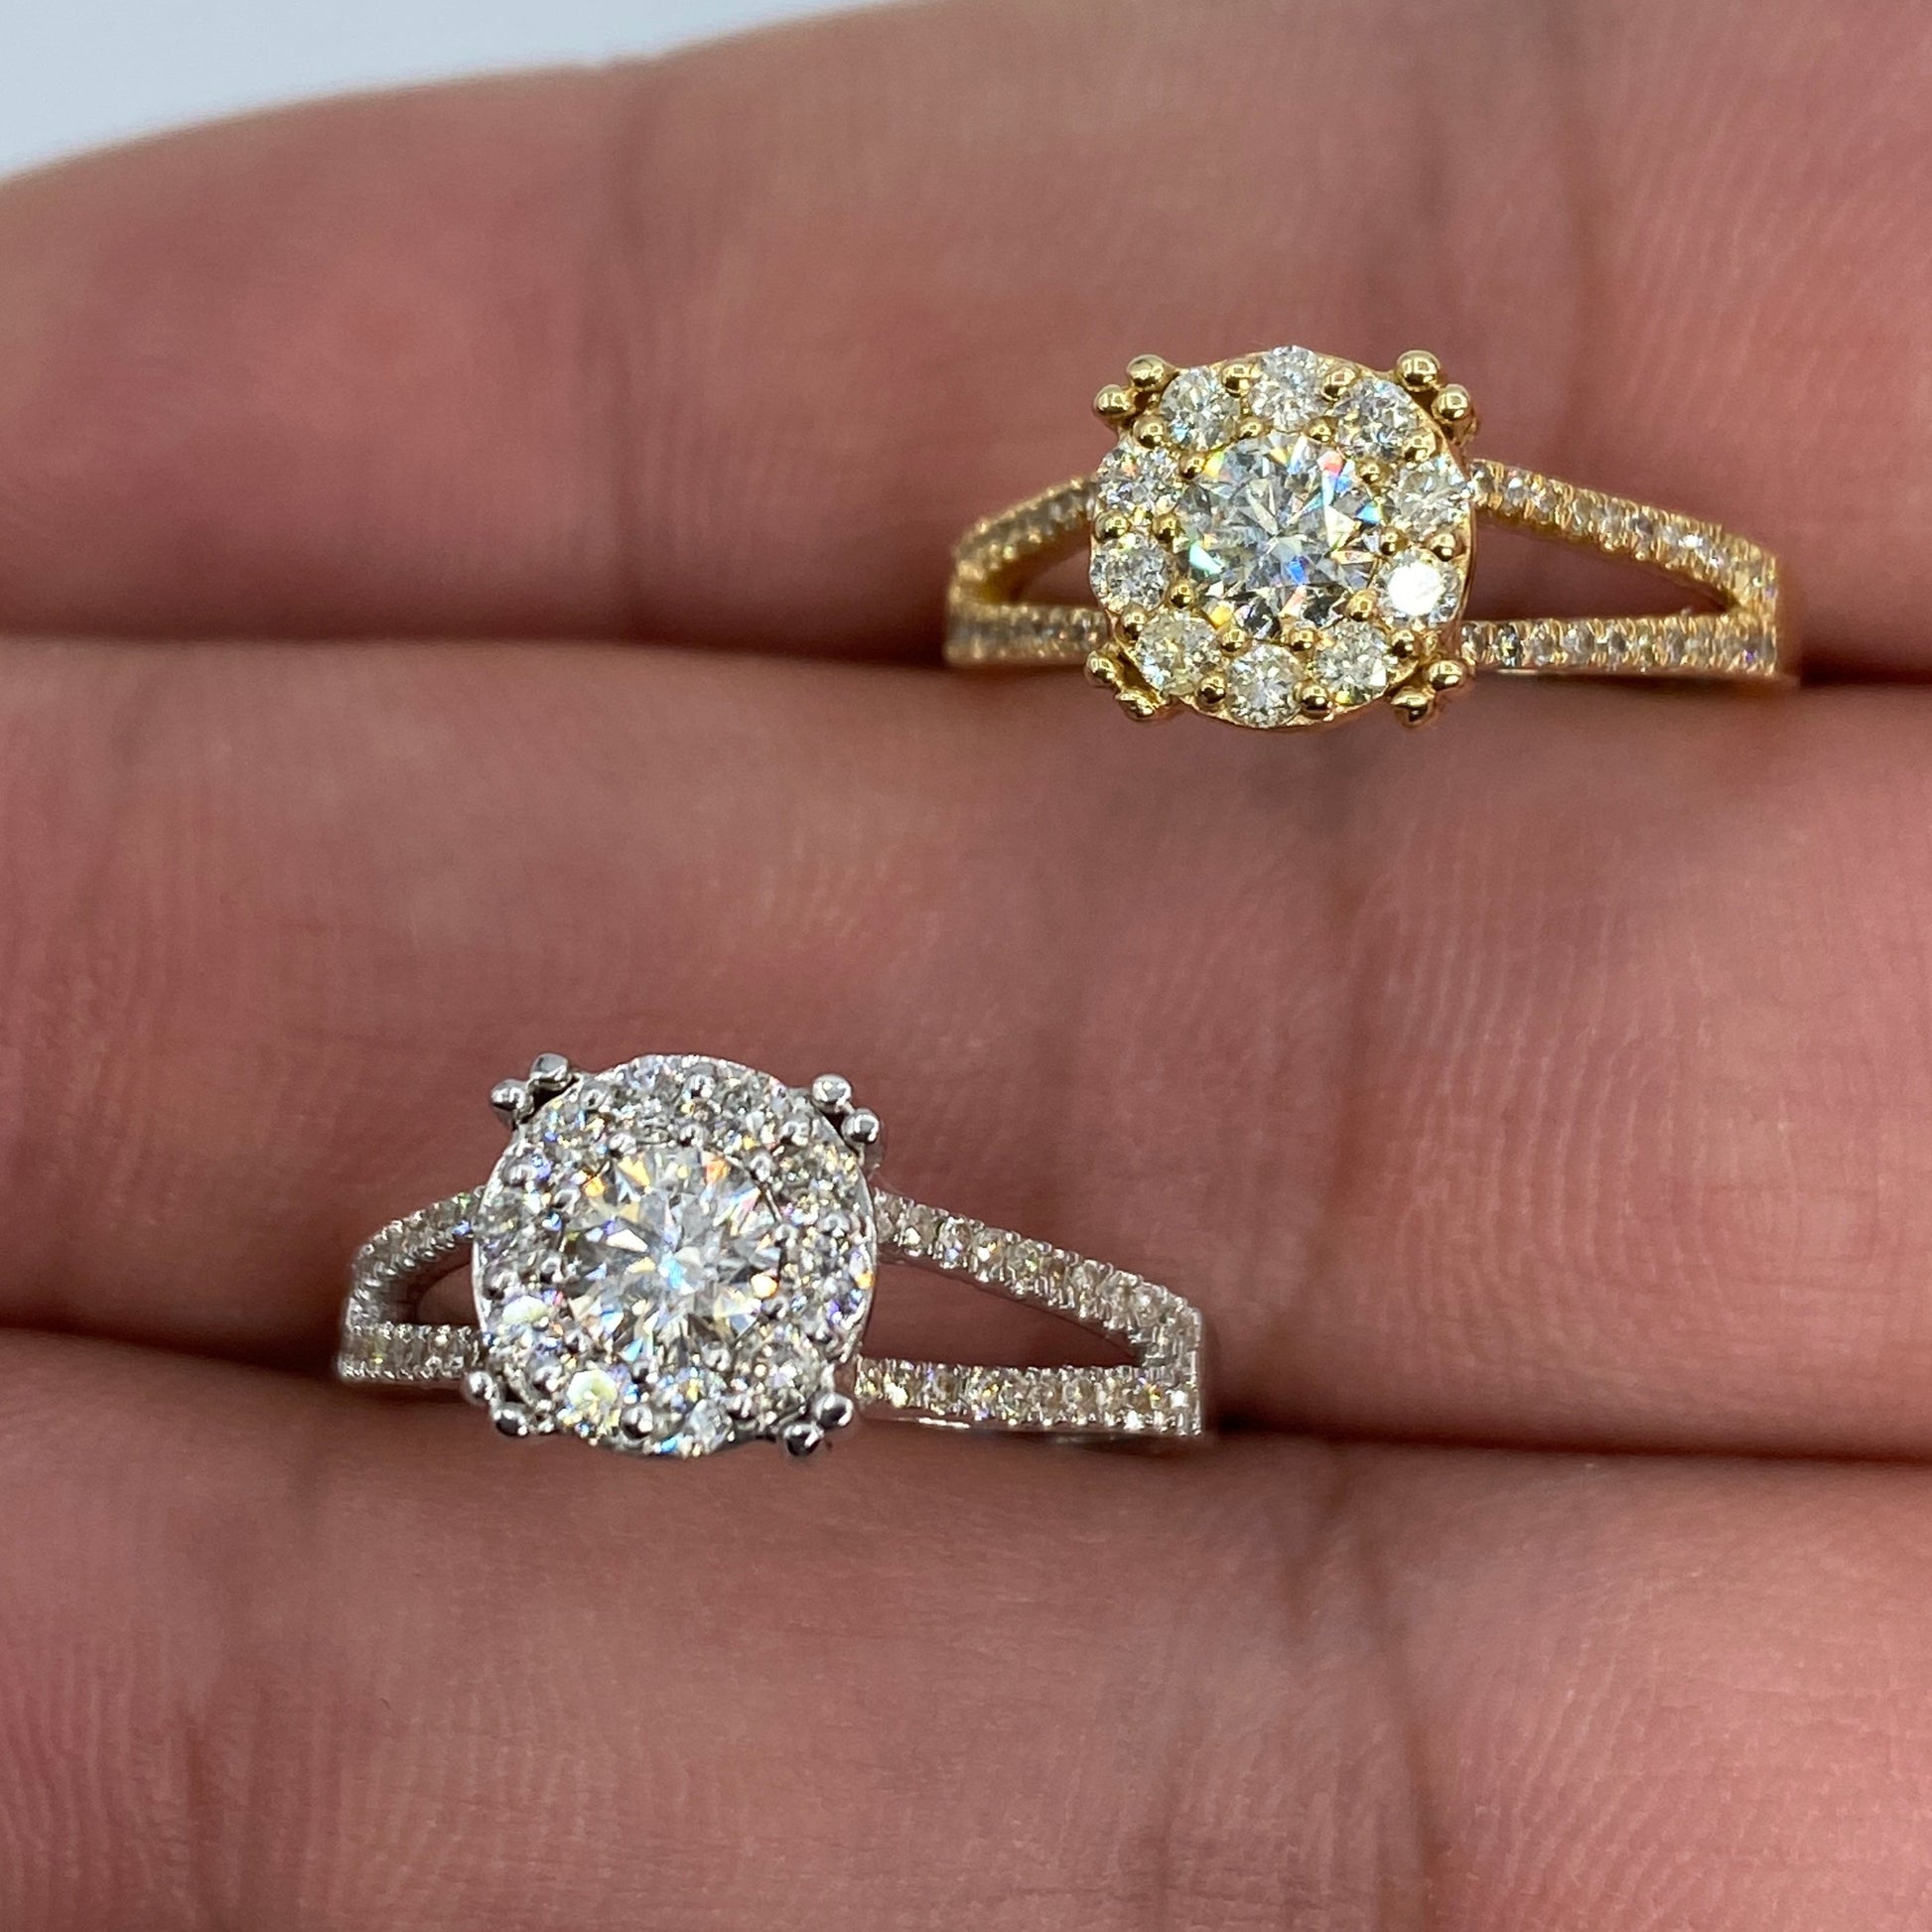 You Need A Yellow Gold Solitaire Engagement Ring By Adiamor